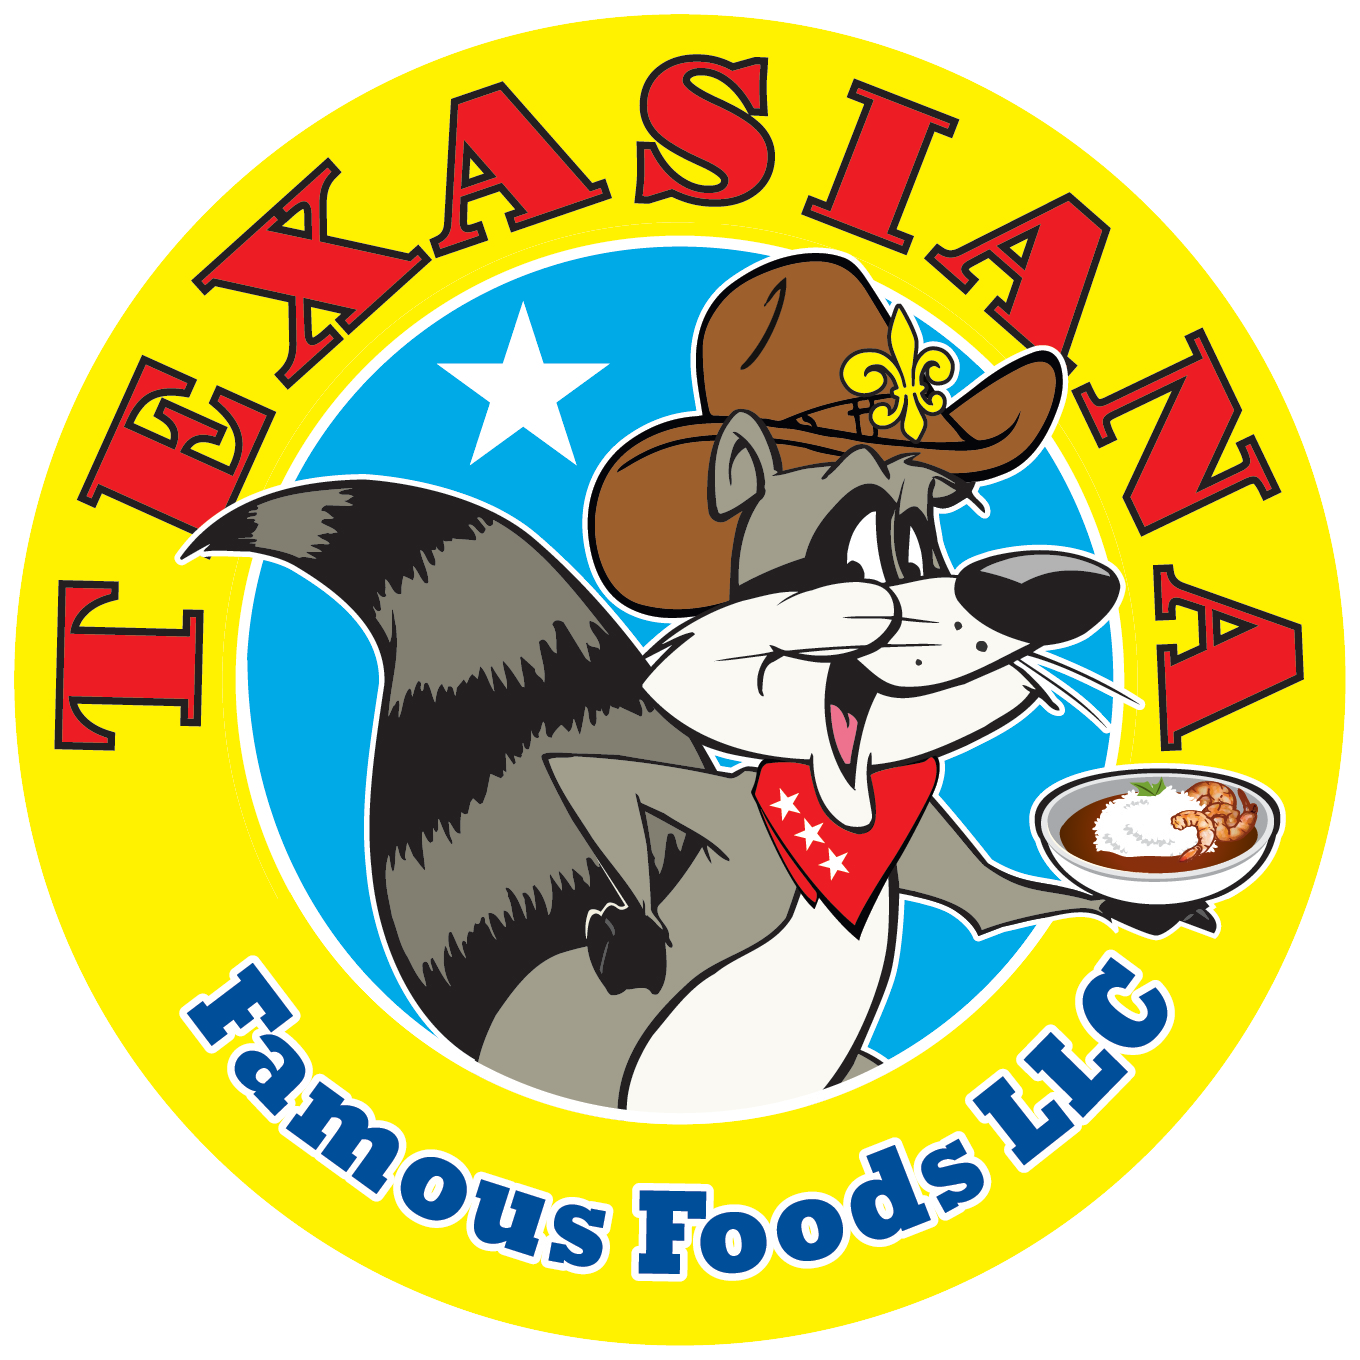 Taxasiana Famous Foods Catering Food Truck